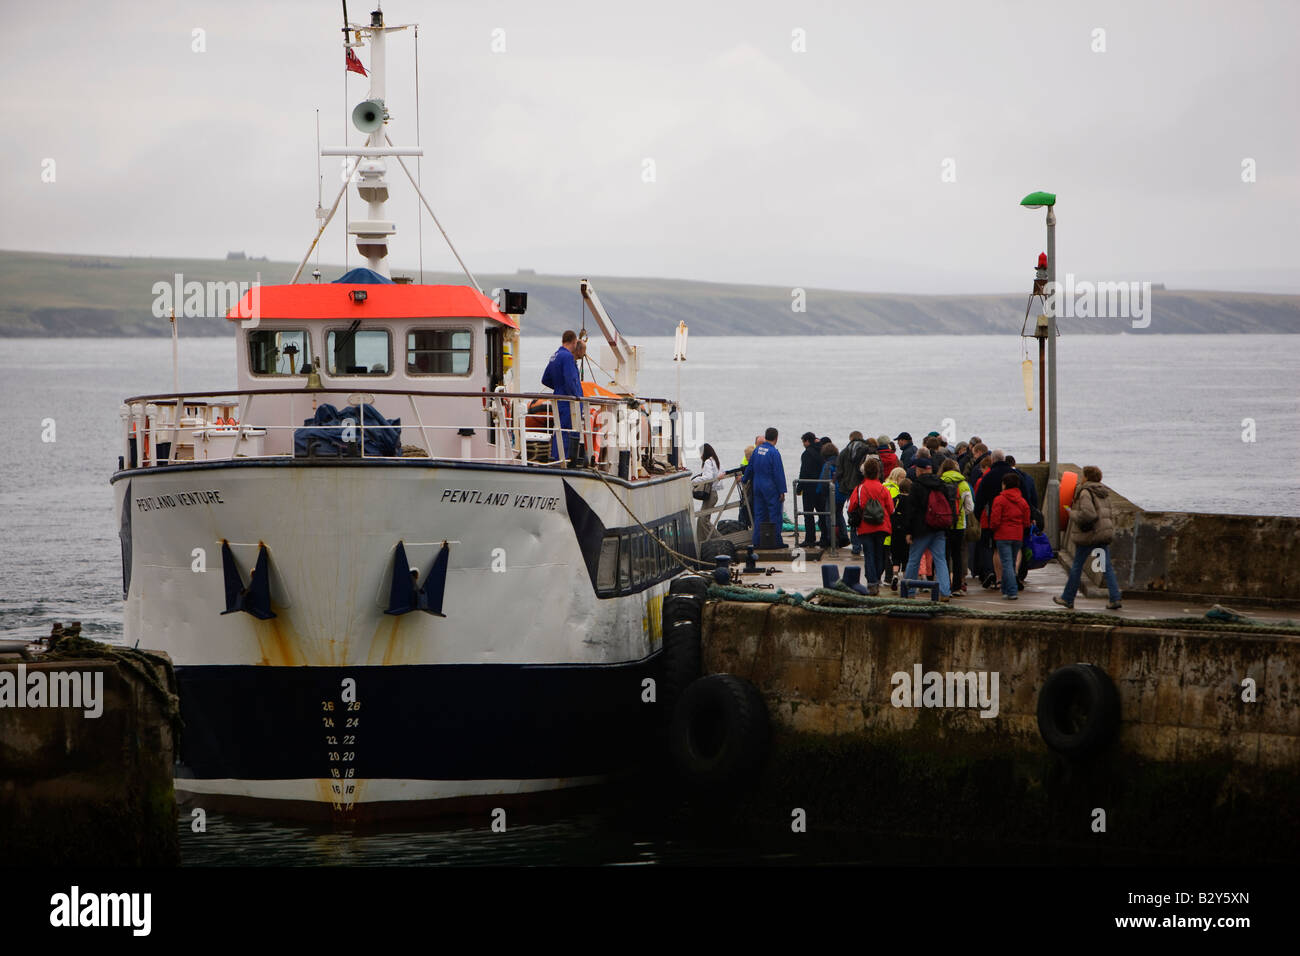 The John O'Groats ferry the Pentland Venture boards passengers before leaving John O'Groats harbour for the Orkneys in Scotland Stock Photo